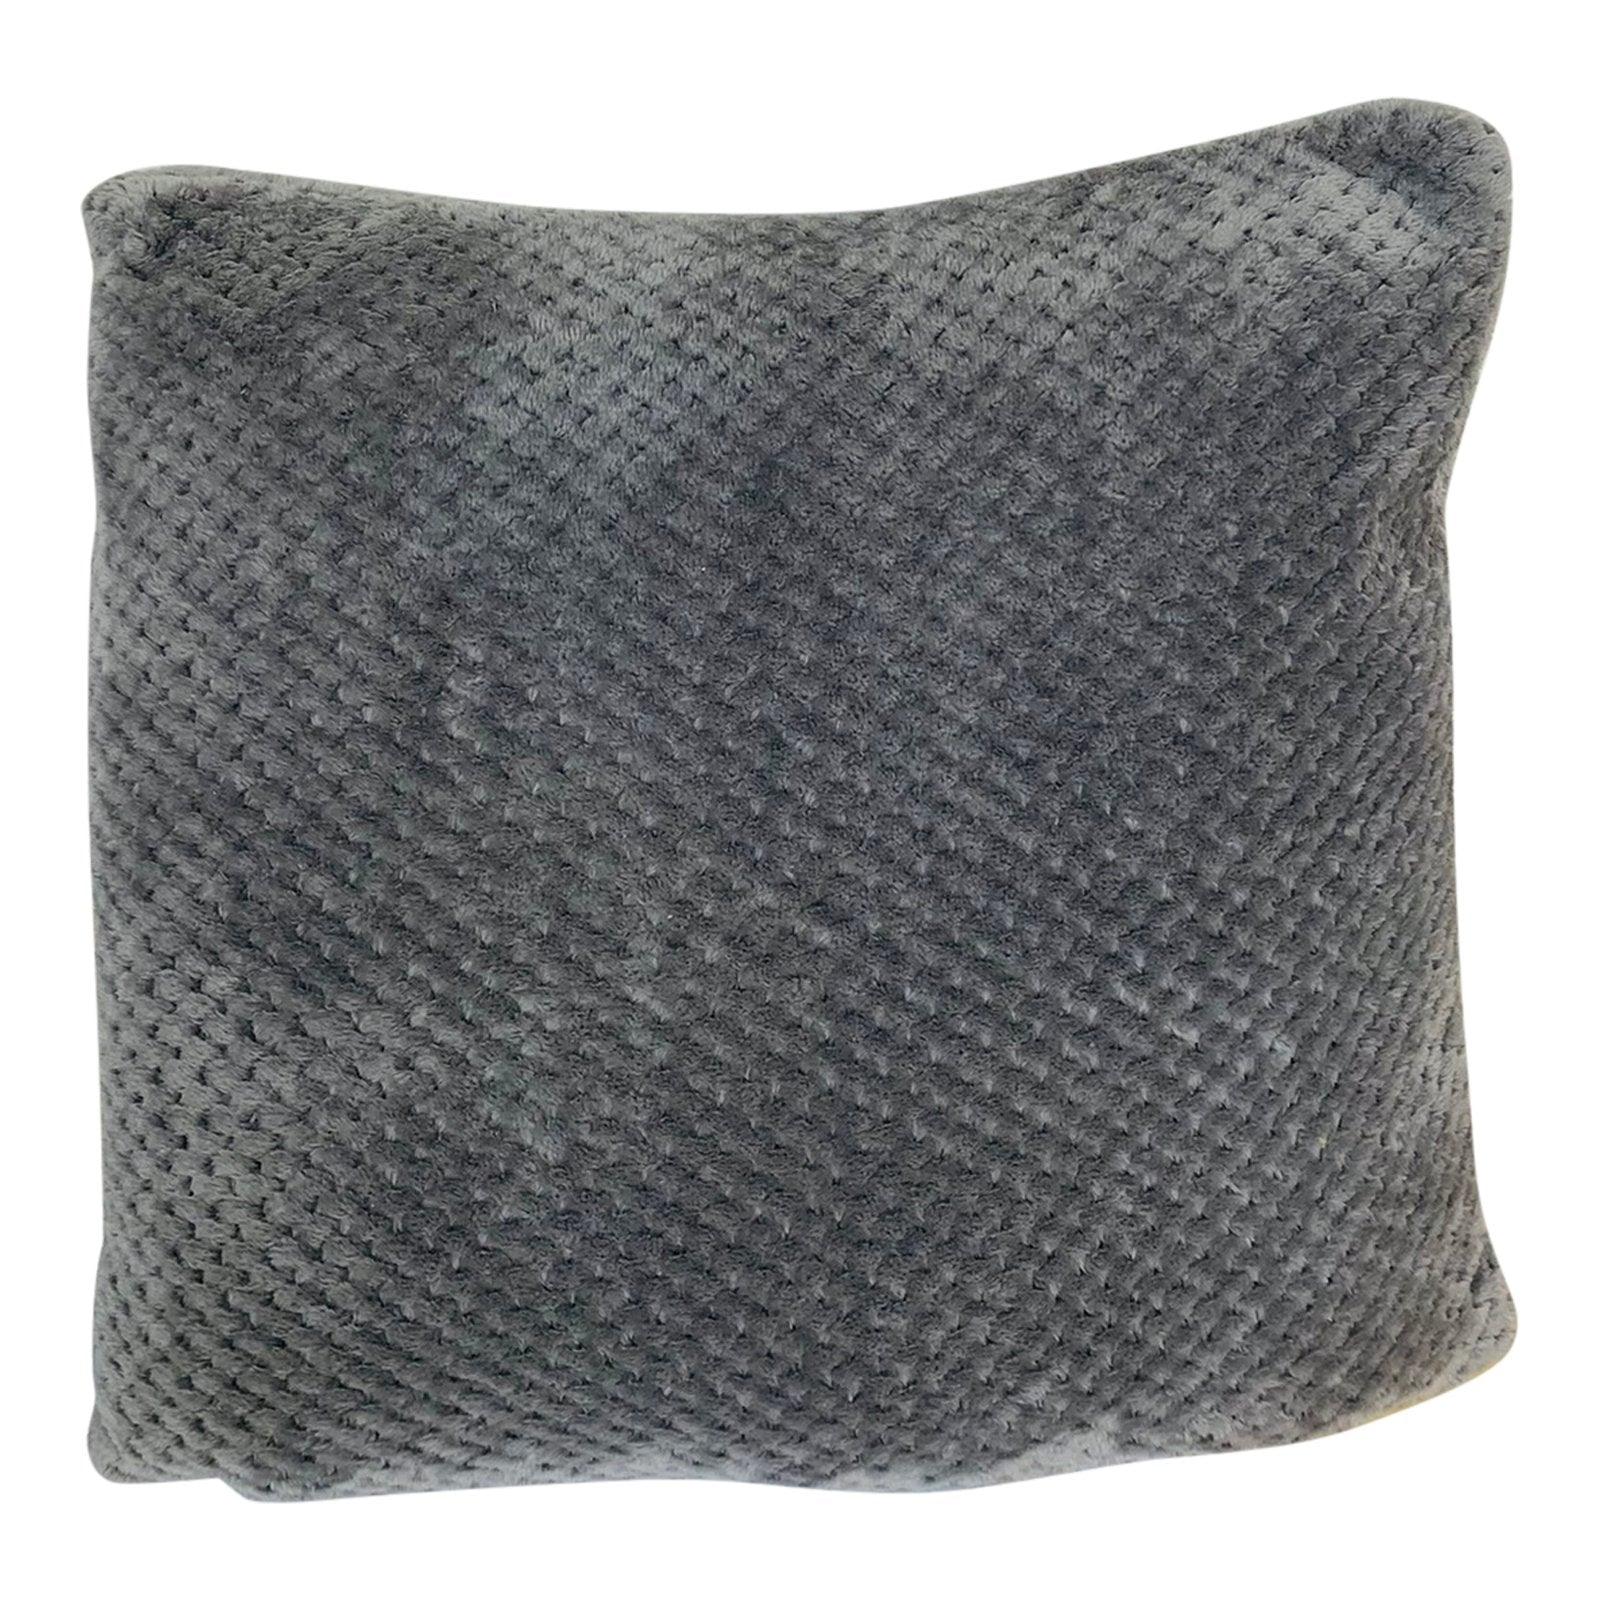 Textured Scatter Cushion Grey 45cm - £26.99 - Throw Pillows 